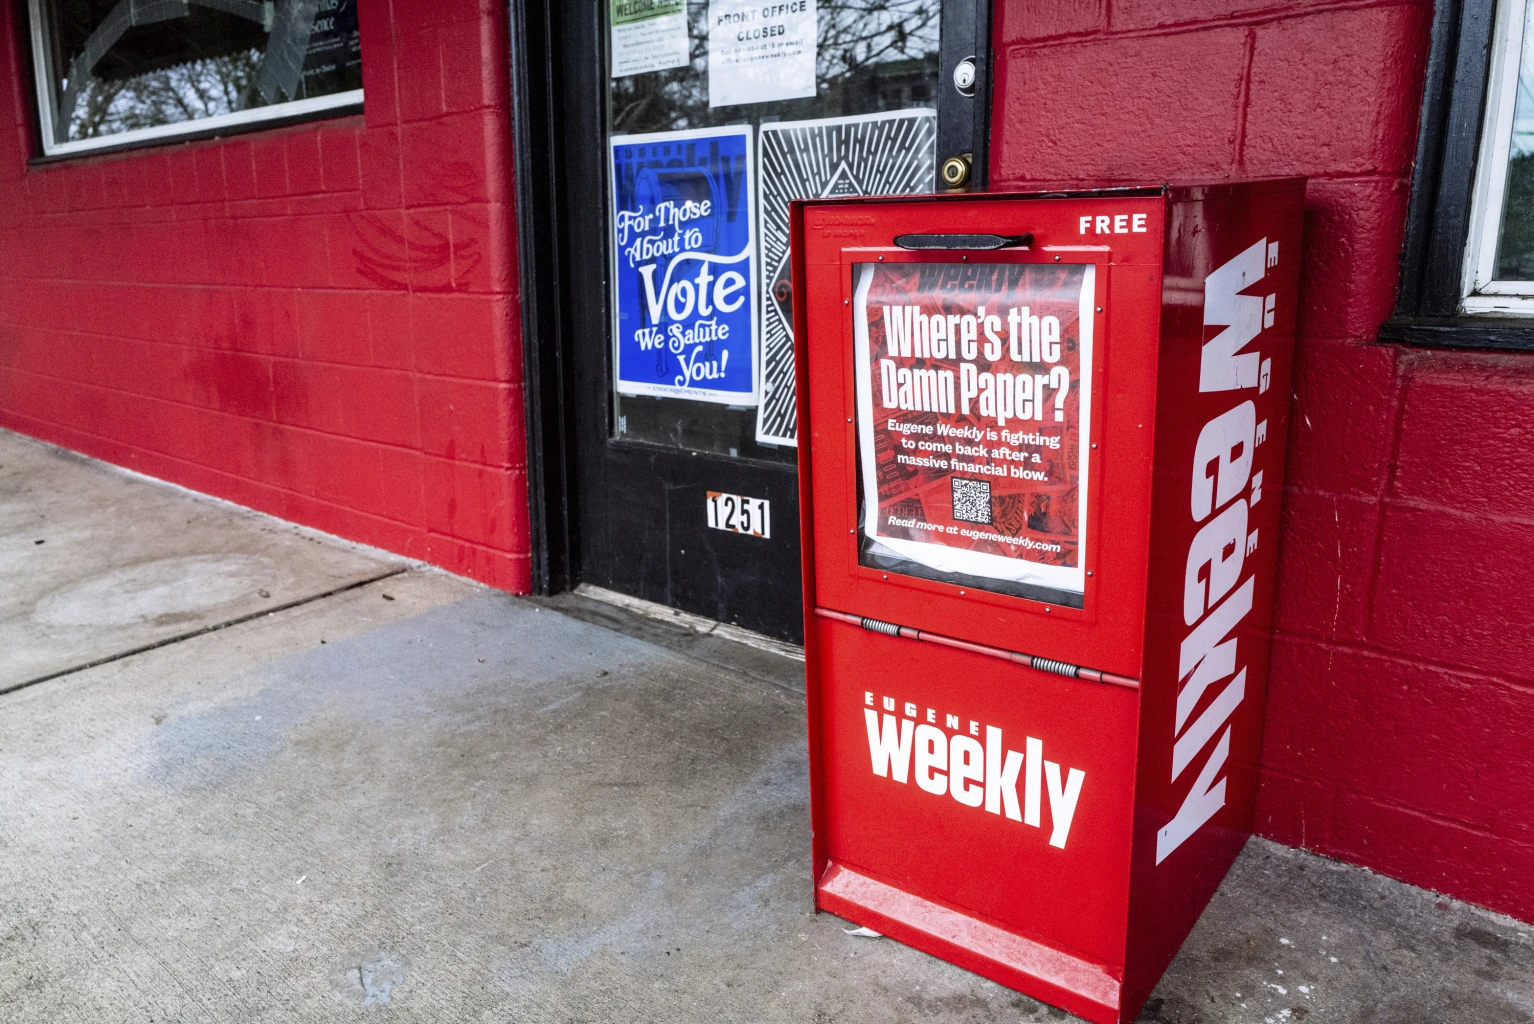 US weekly newspaper lays off entire staff, halts print after theft of funds by former employee